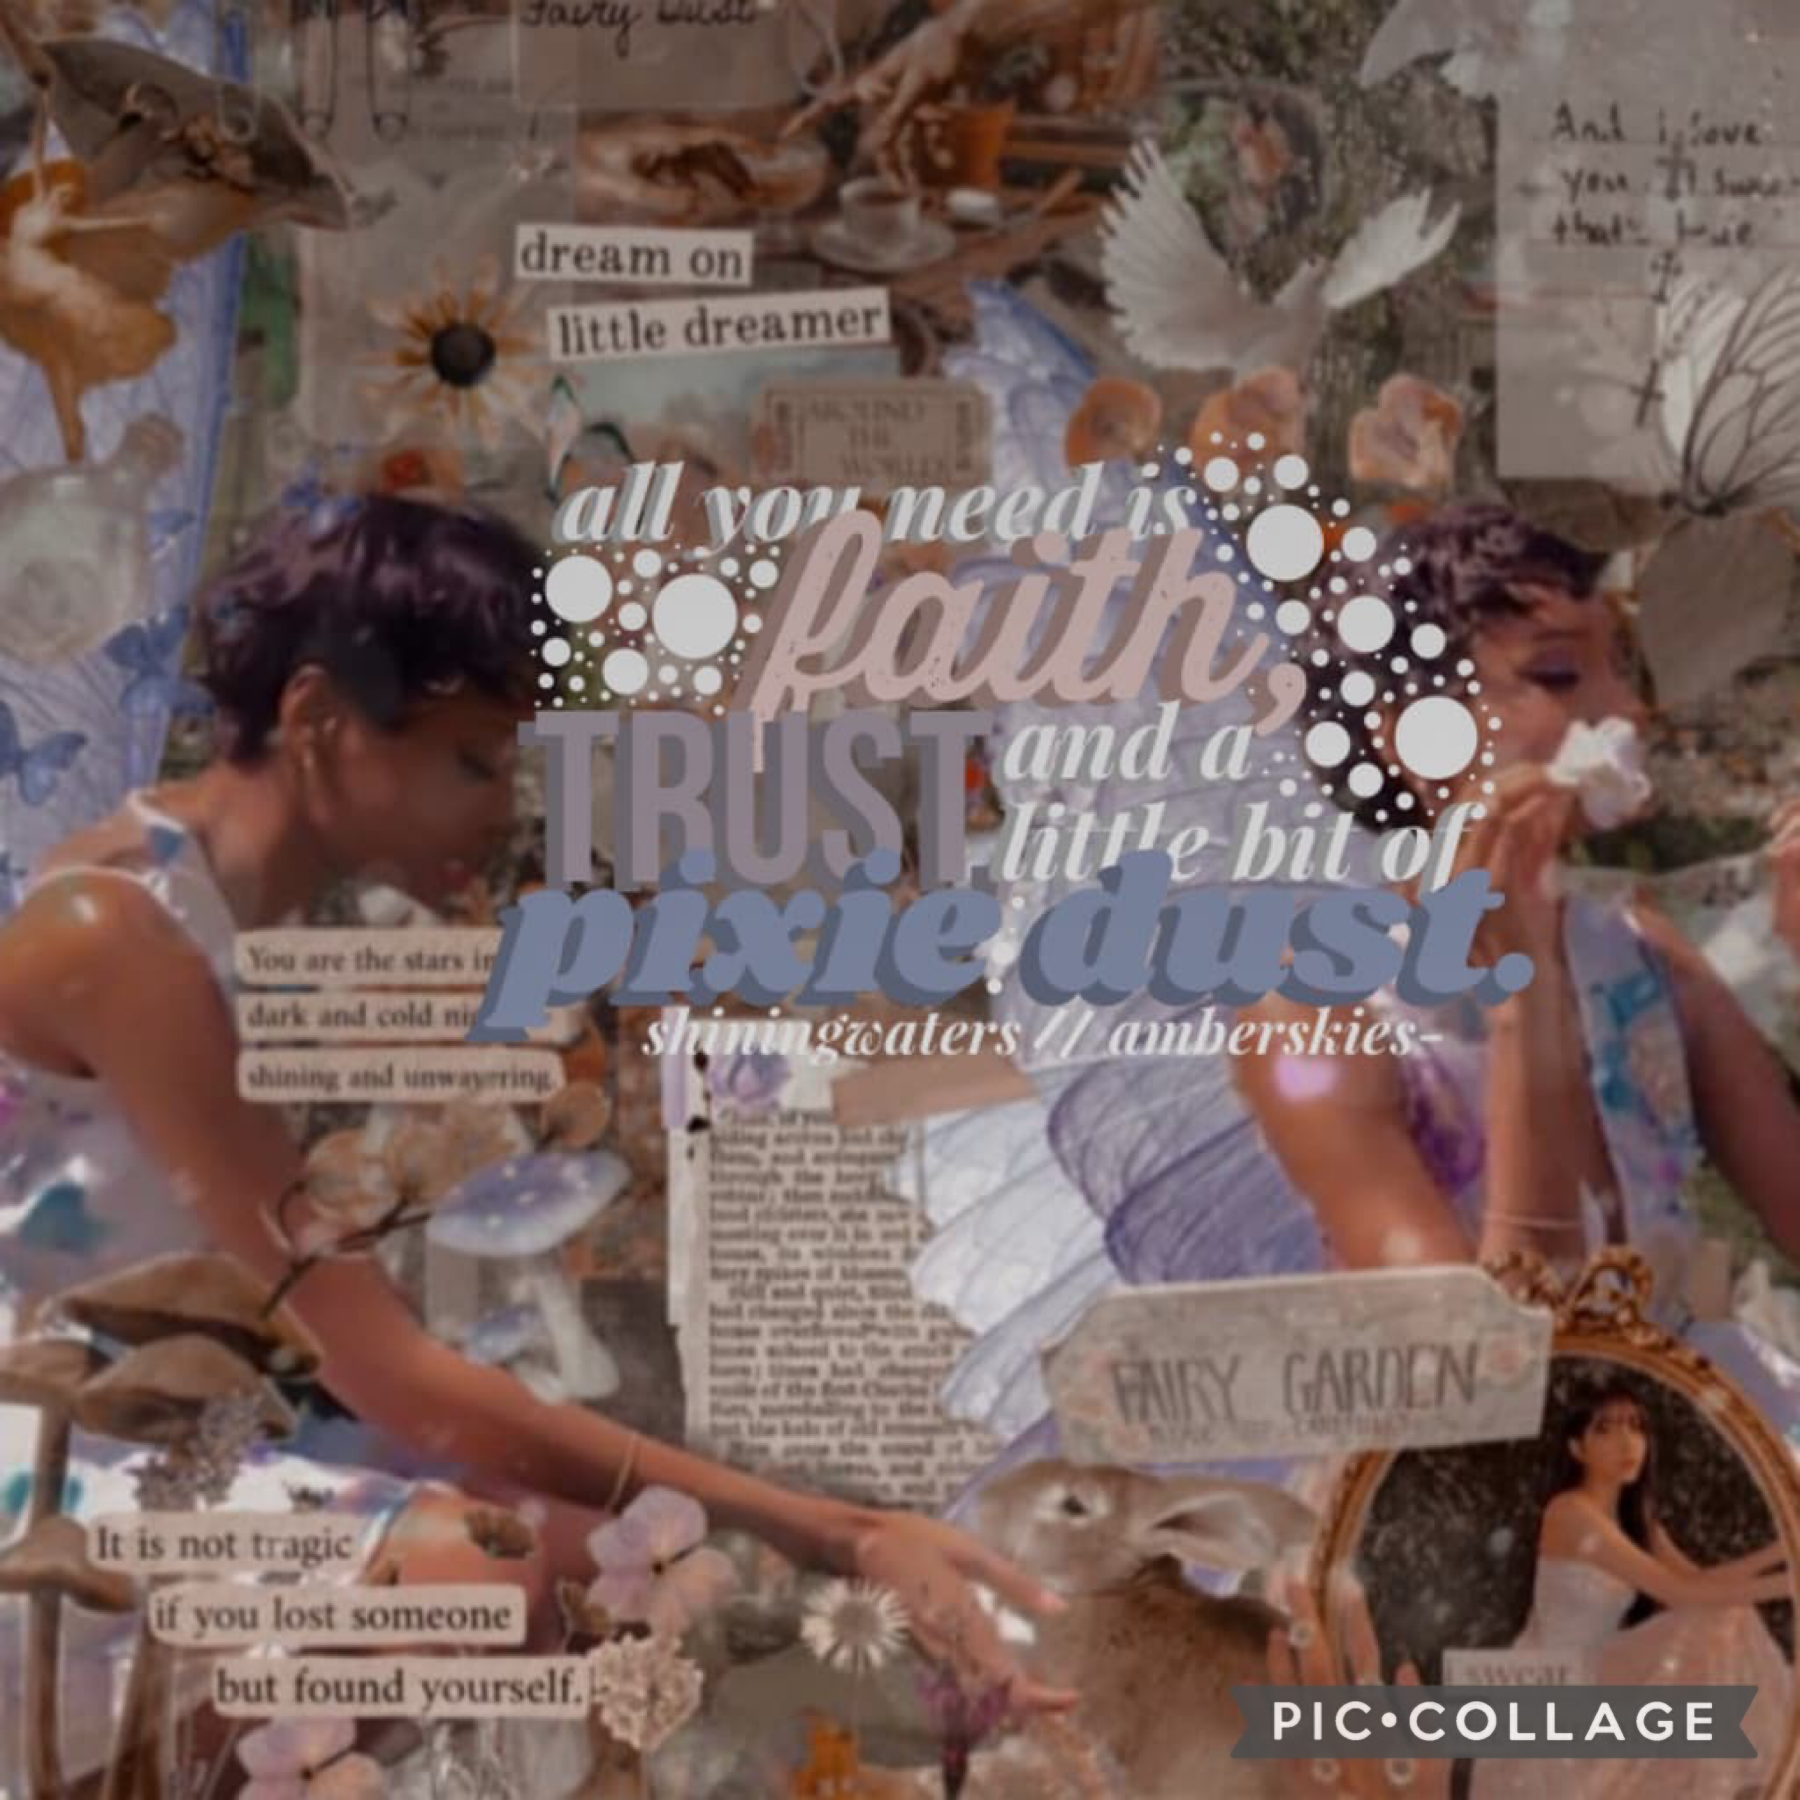 🦋collab with the AMAZING shiningwaters- 🦋
she did the beautiful text and i did the background! tysm for collaborating with me! let’s do it again soon! qotd: favorite pair of shoes? aotd; my yellow vans (haha basic ik) 💕💞